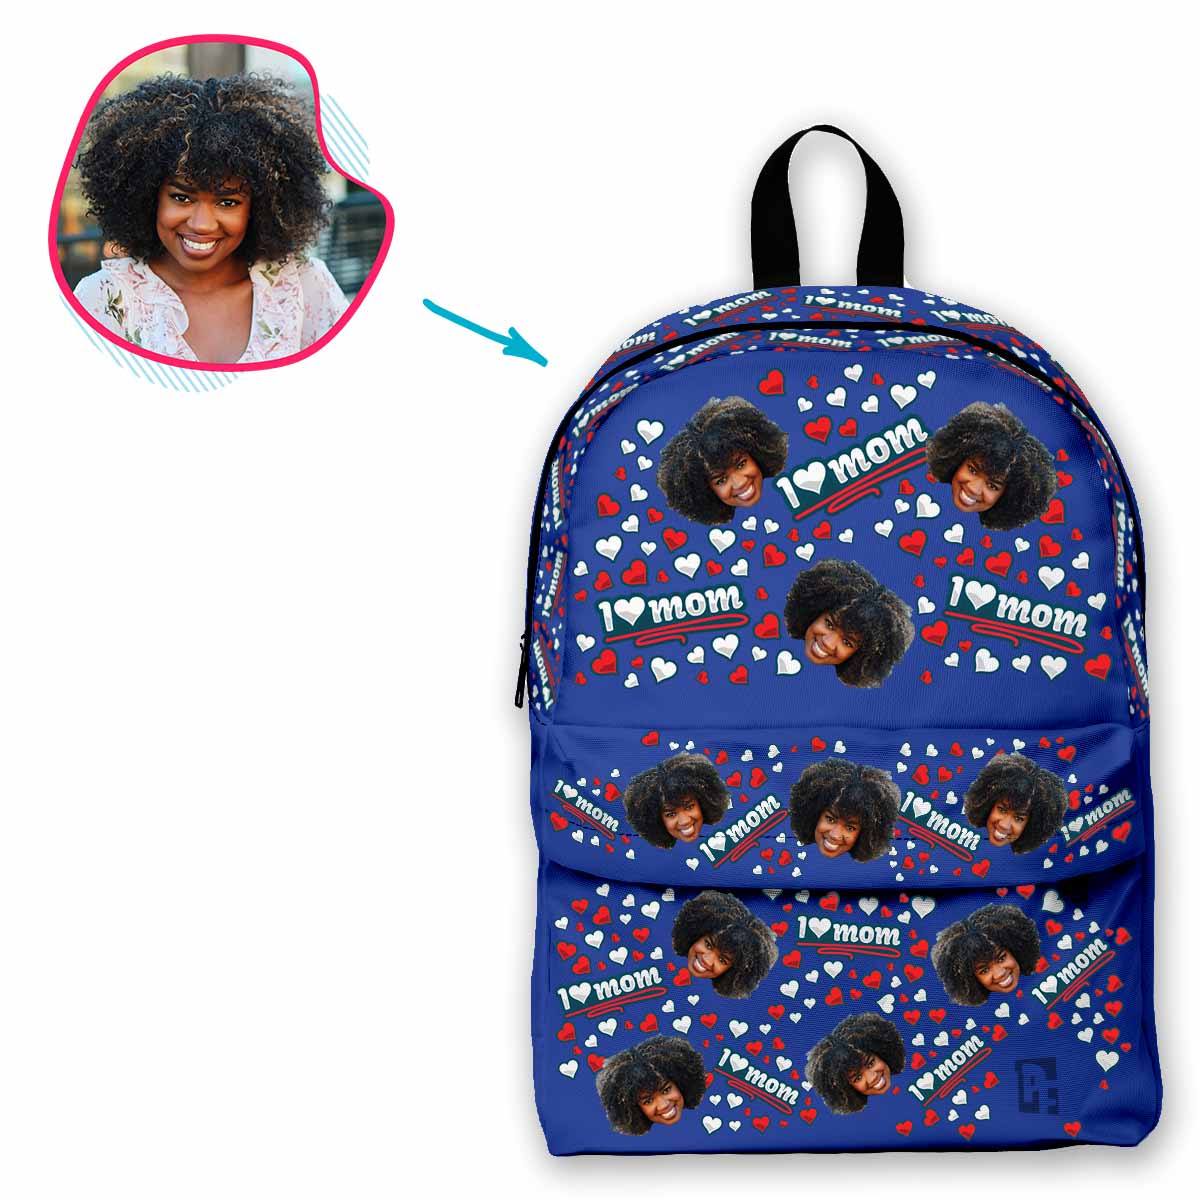 darkblue Love Mom classic backpack personalized with photo of face printed on it